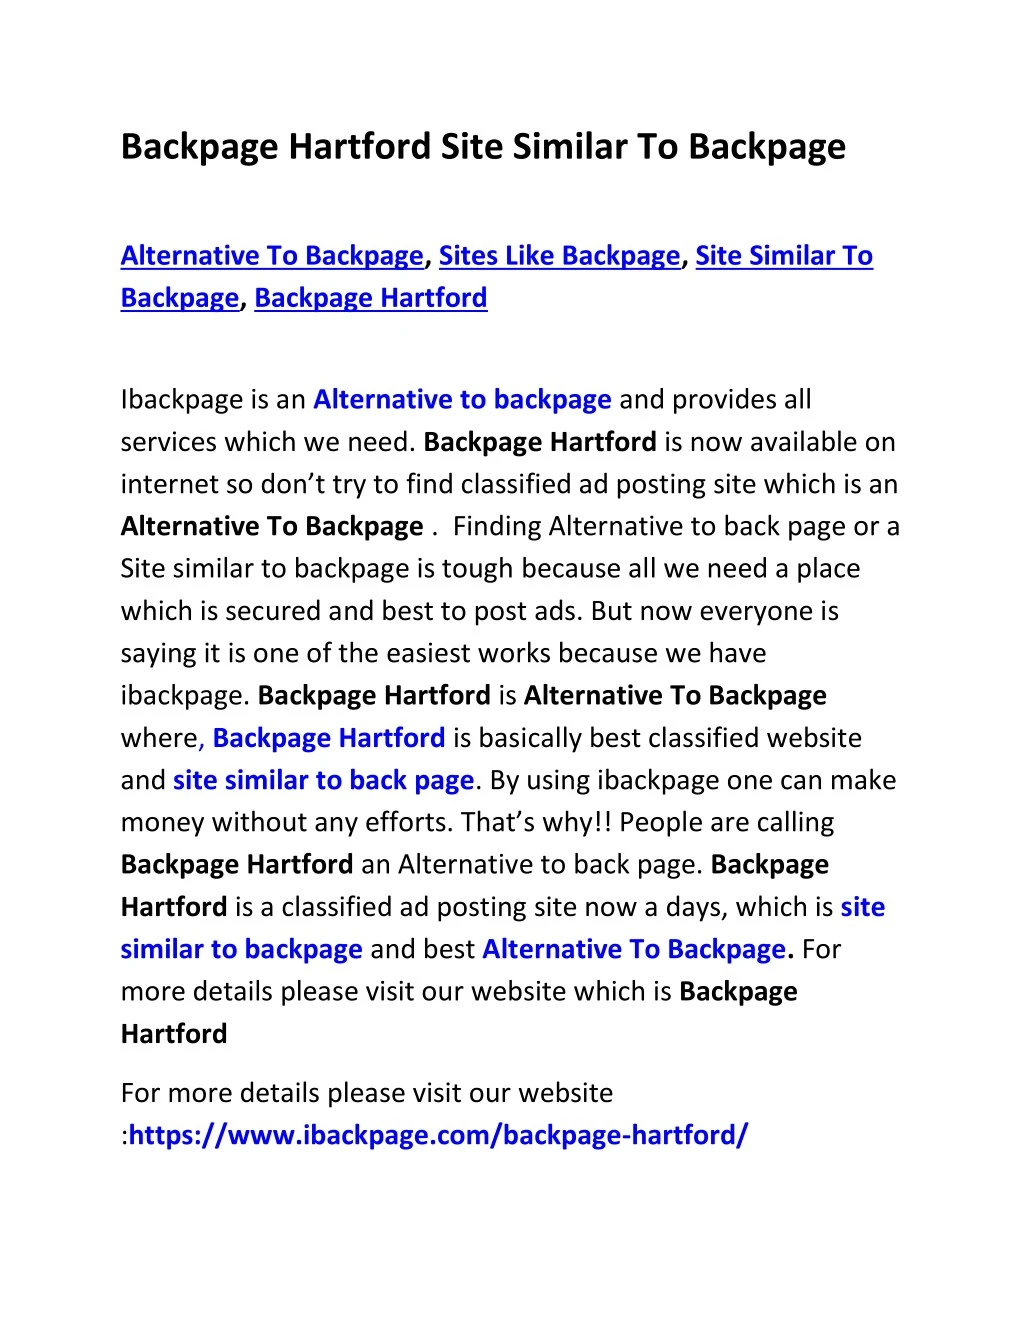 backpage hartford site similar to backpage